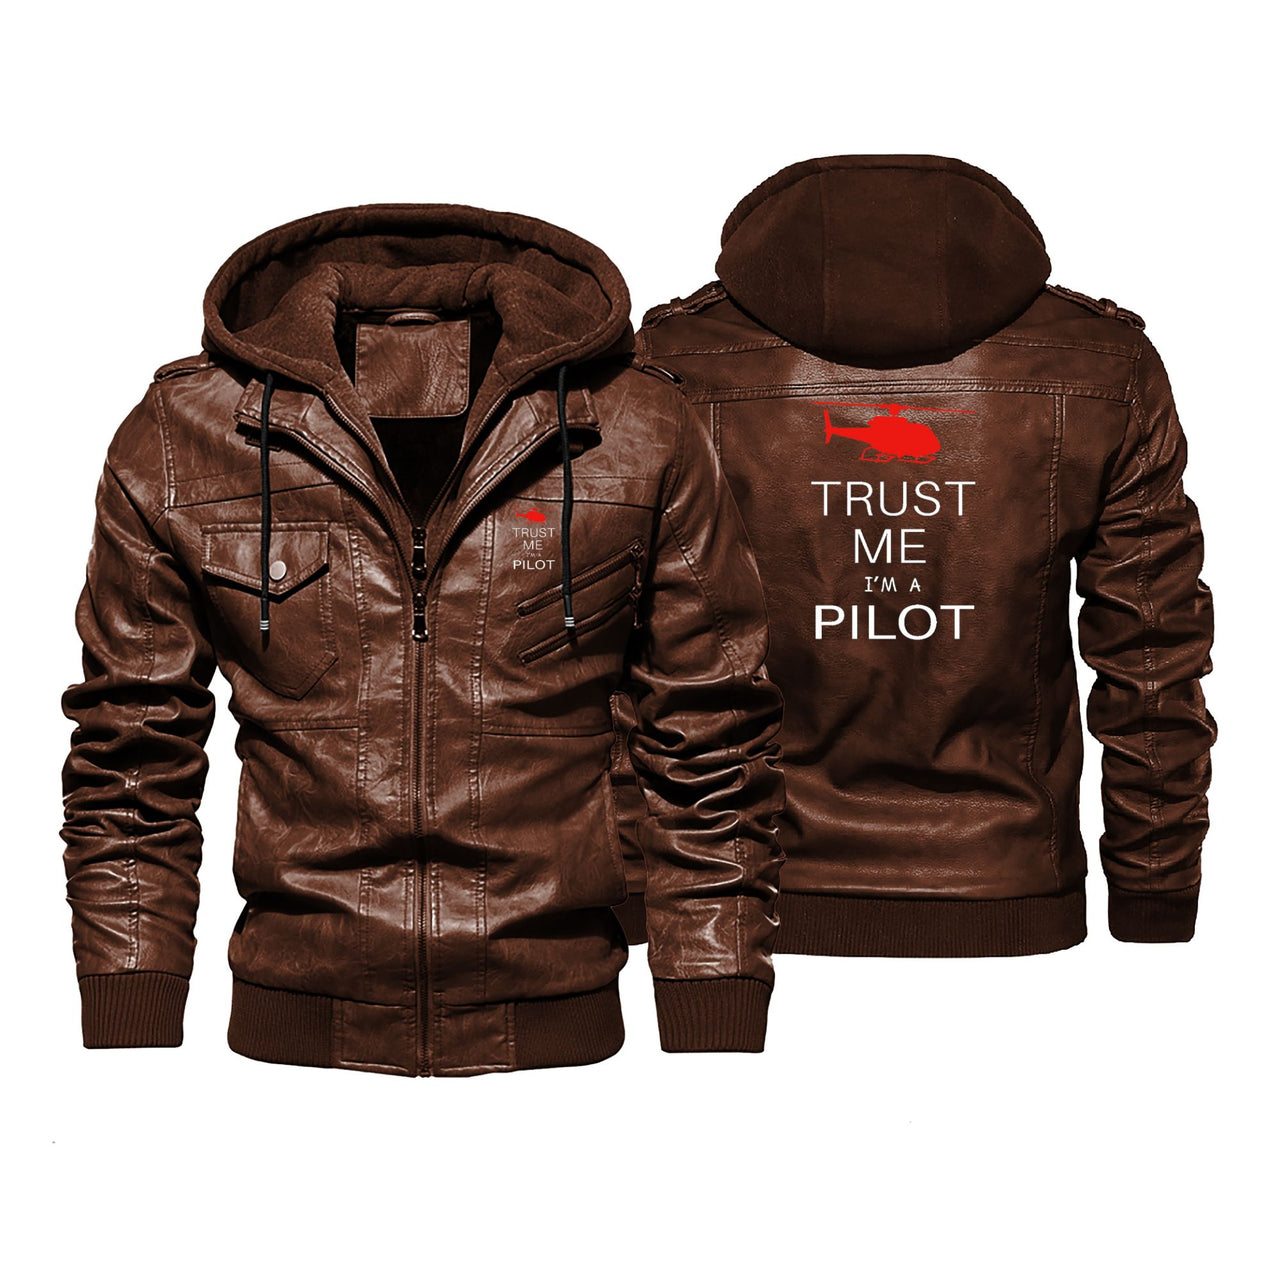 Trust Me I'm a Pilot (Helicopter) Designed Hooded Leather Jackets